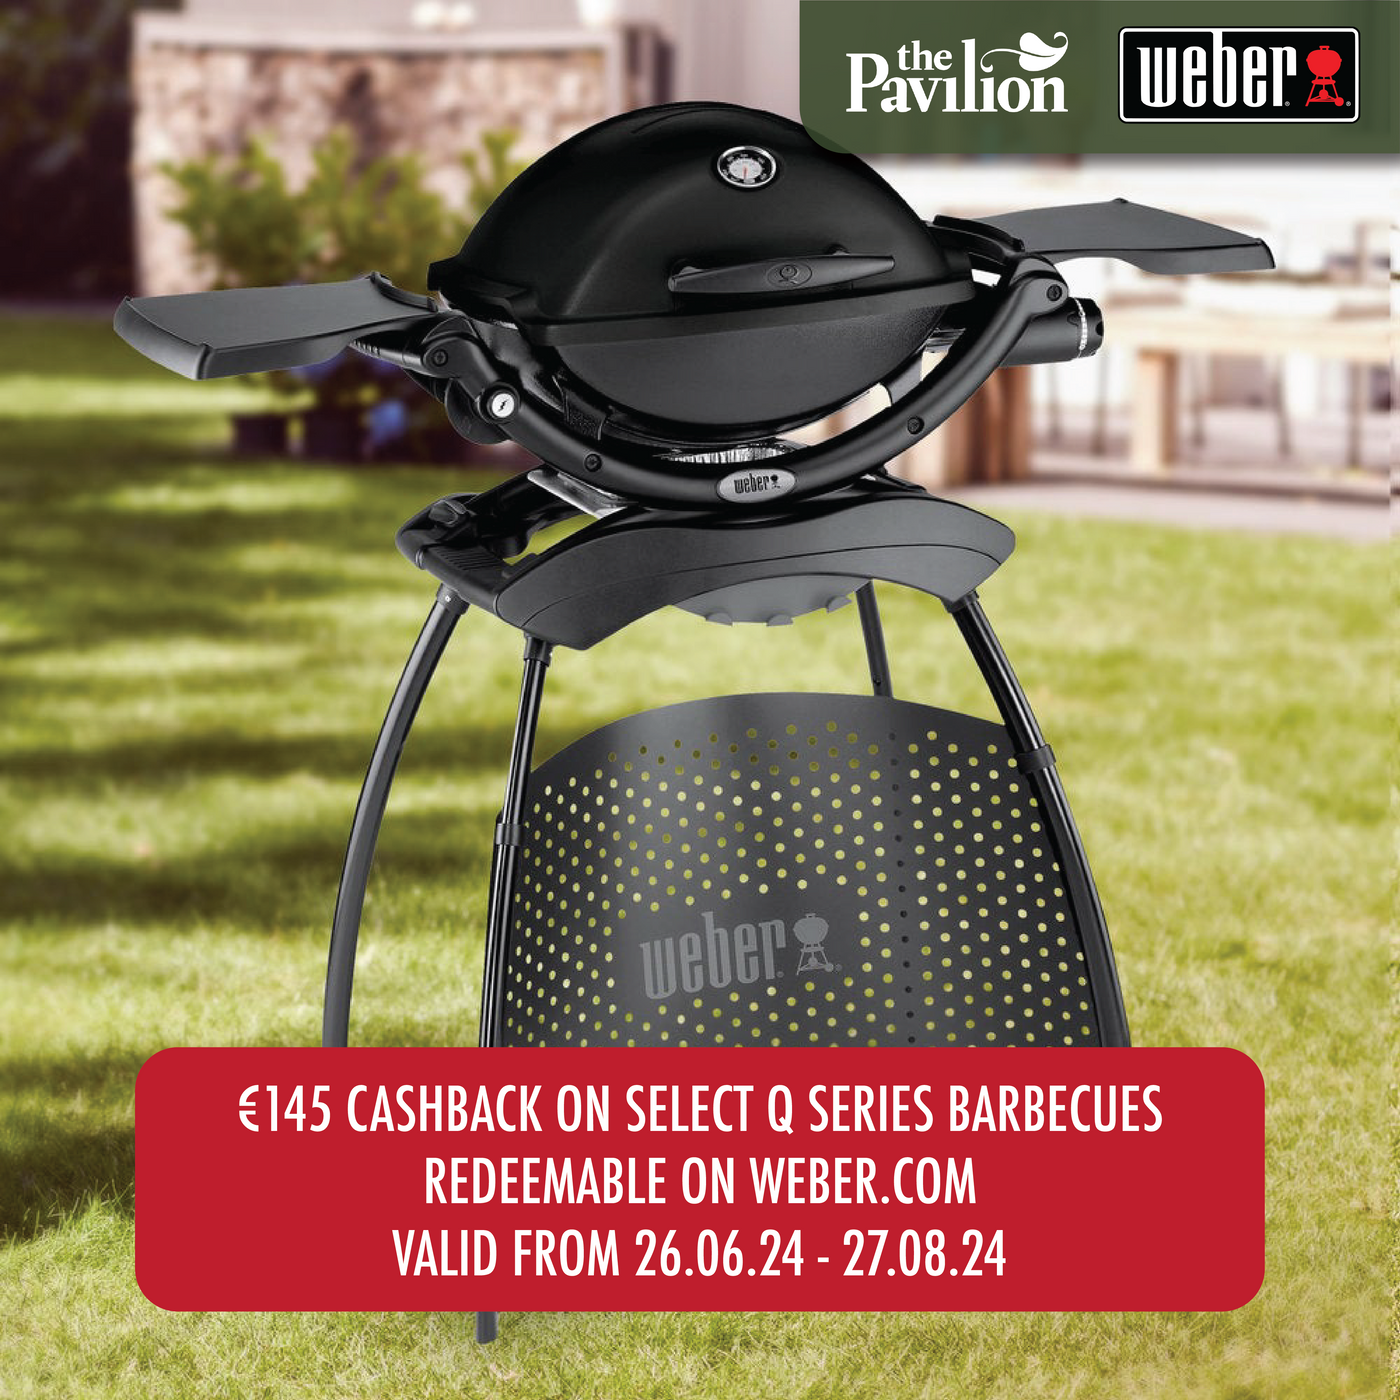 Weber Q 2200 Gas Barbecue with Stand - Black